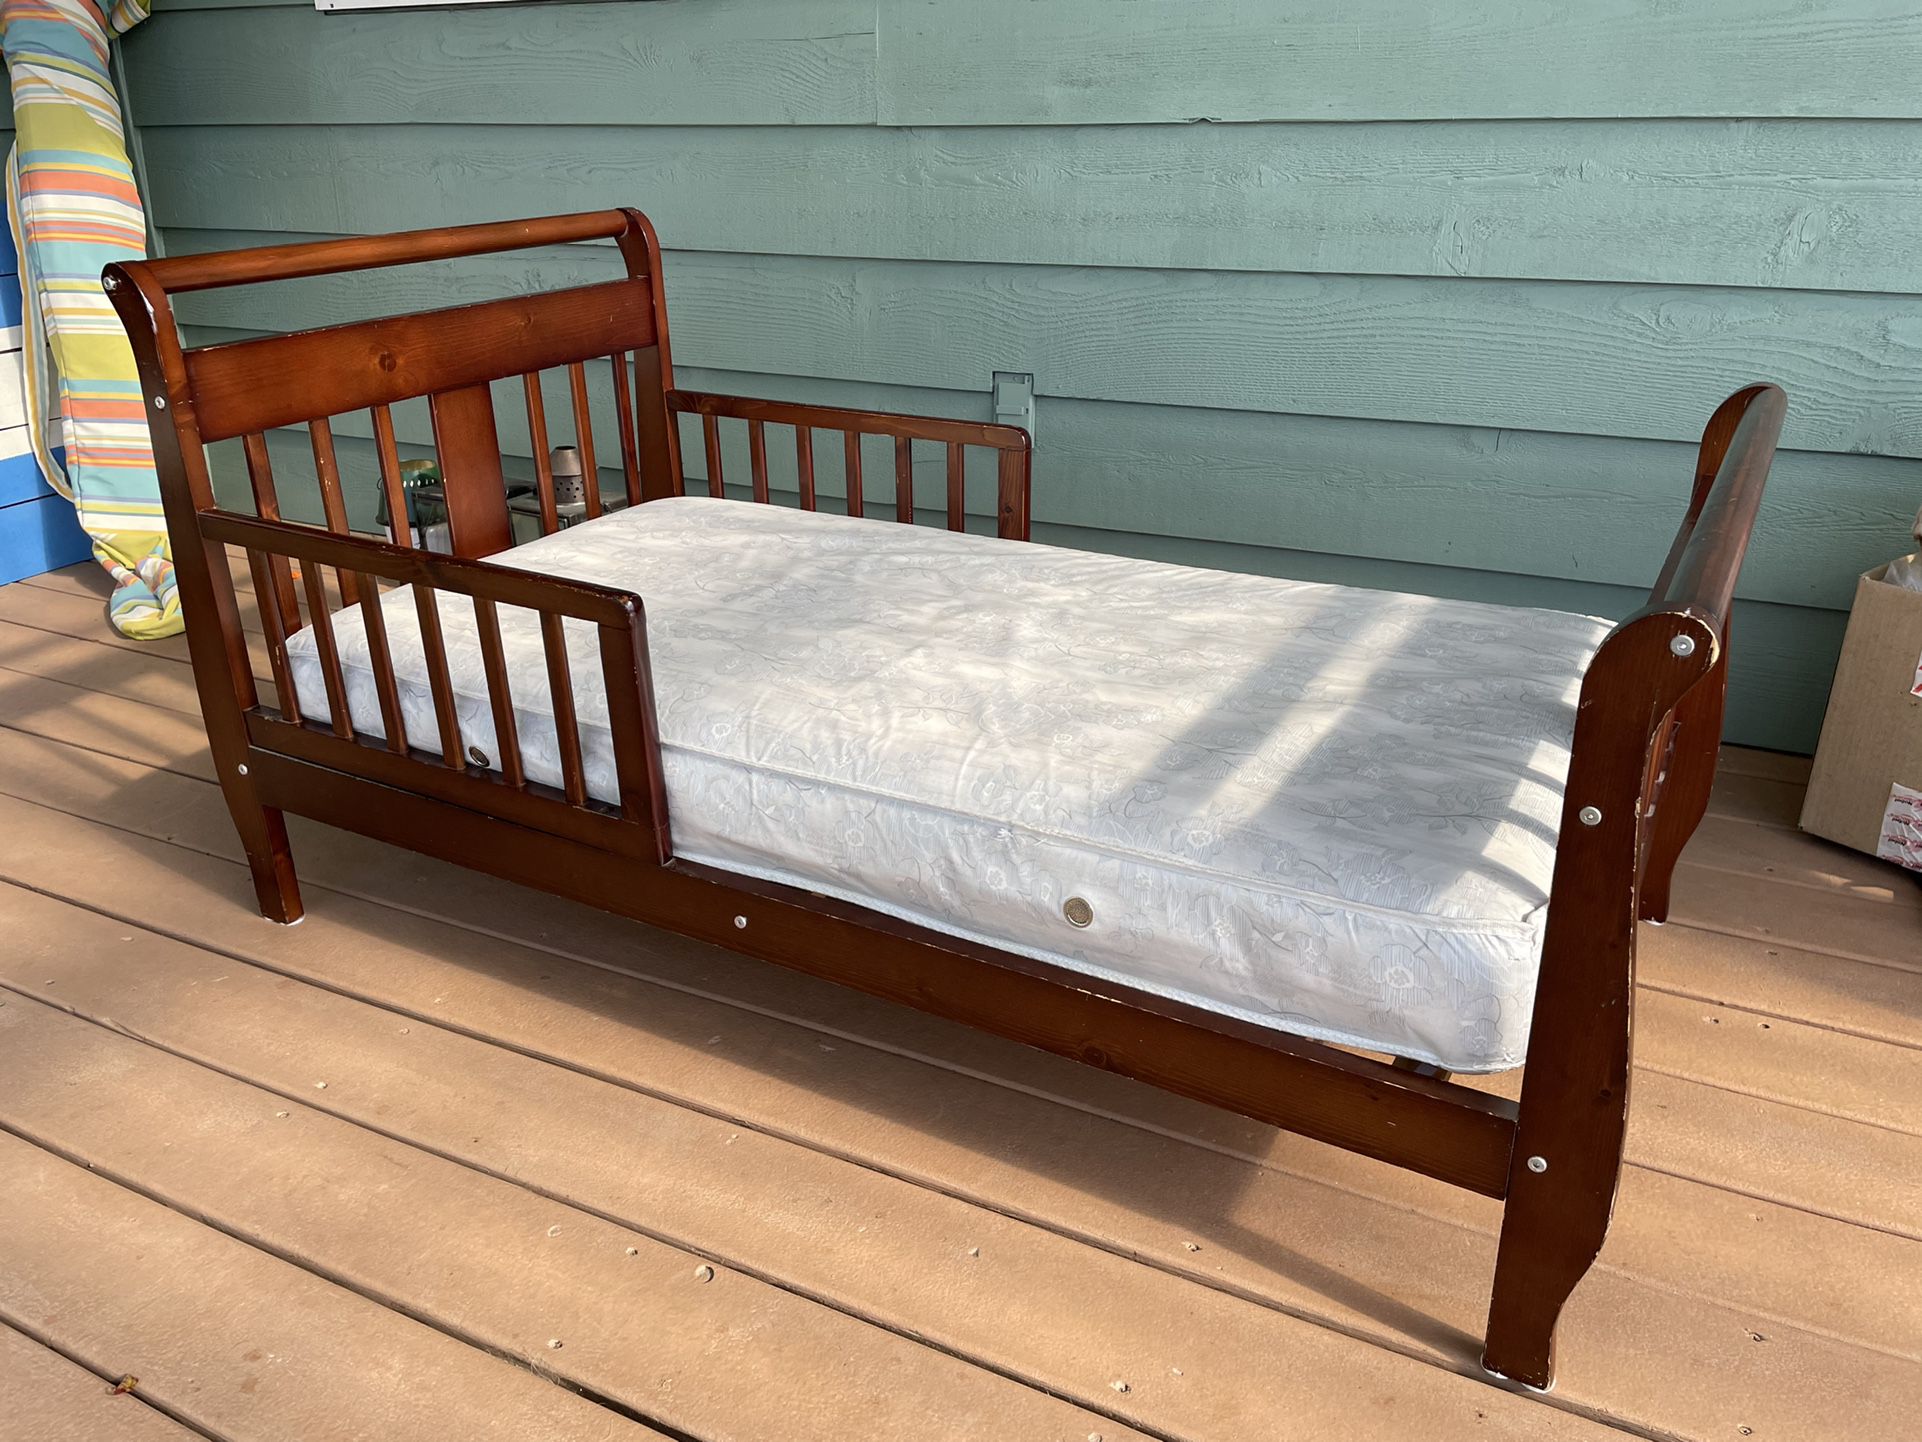  Toddler Bed And Mattress 